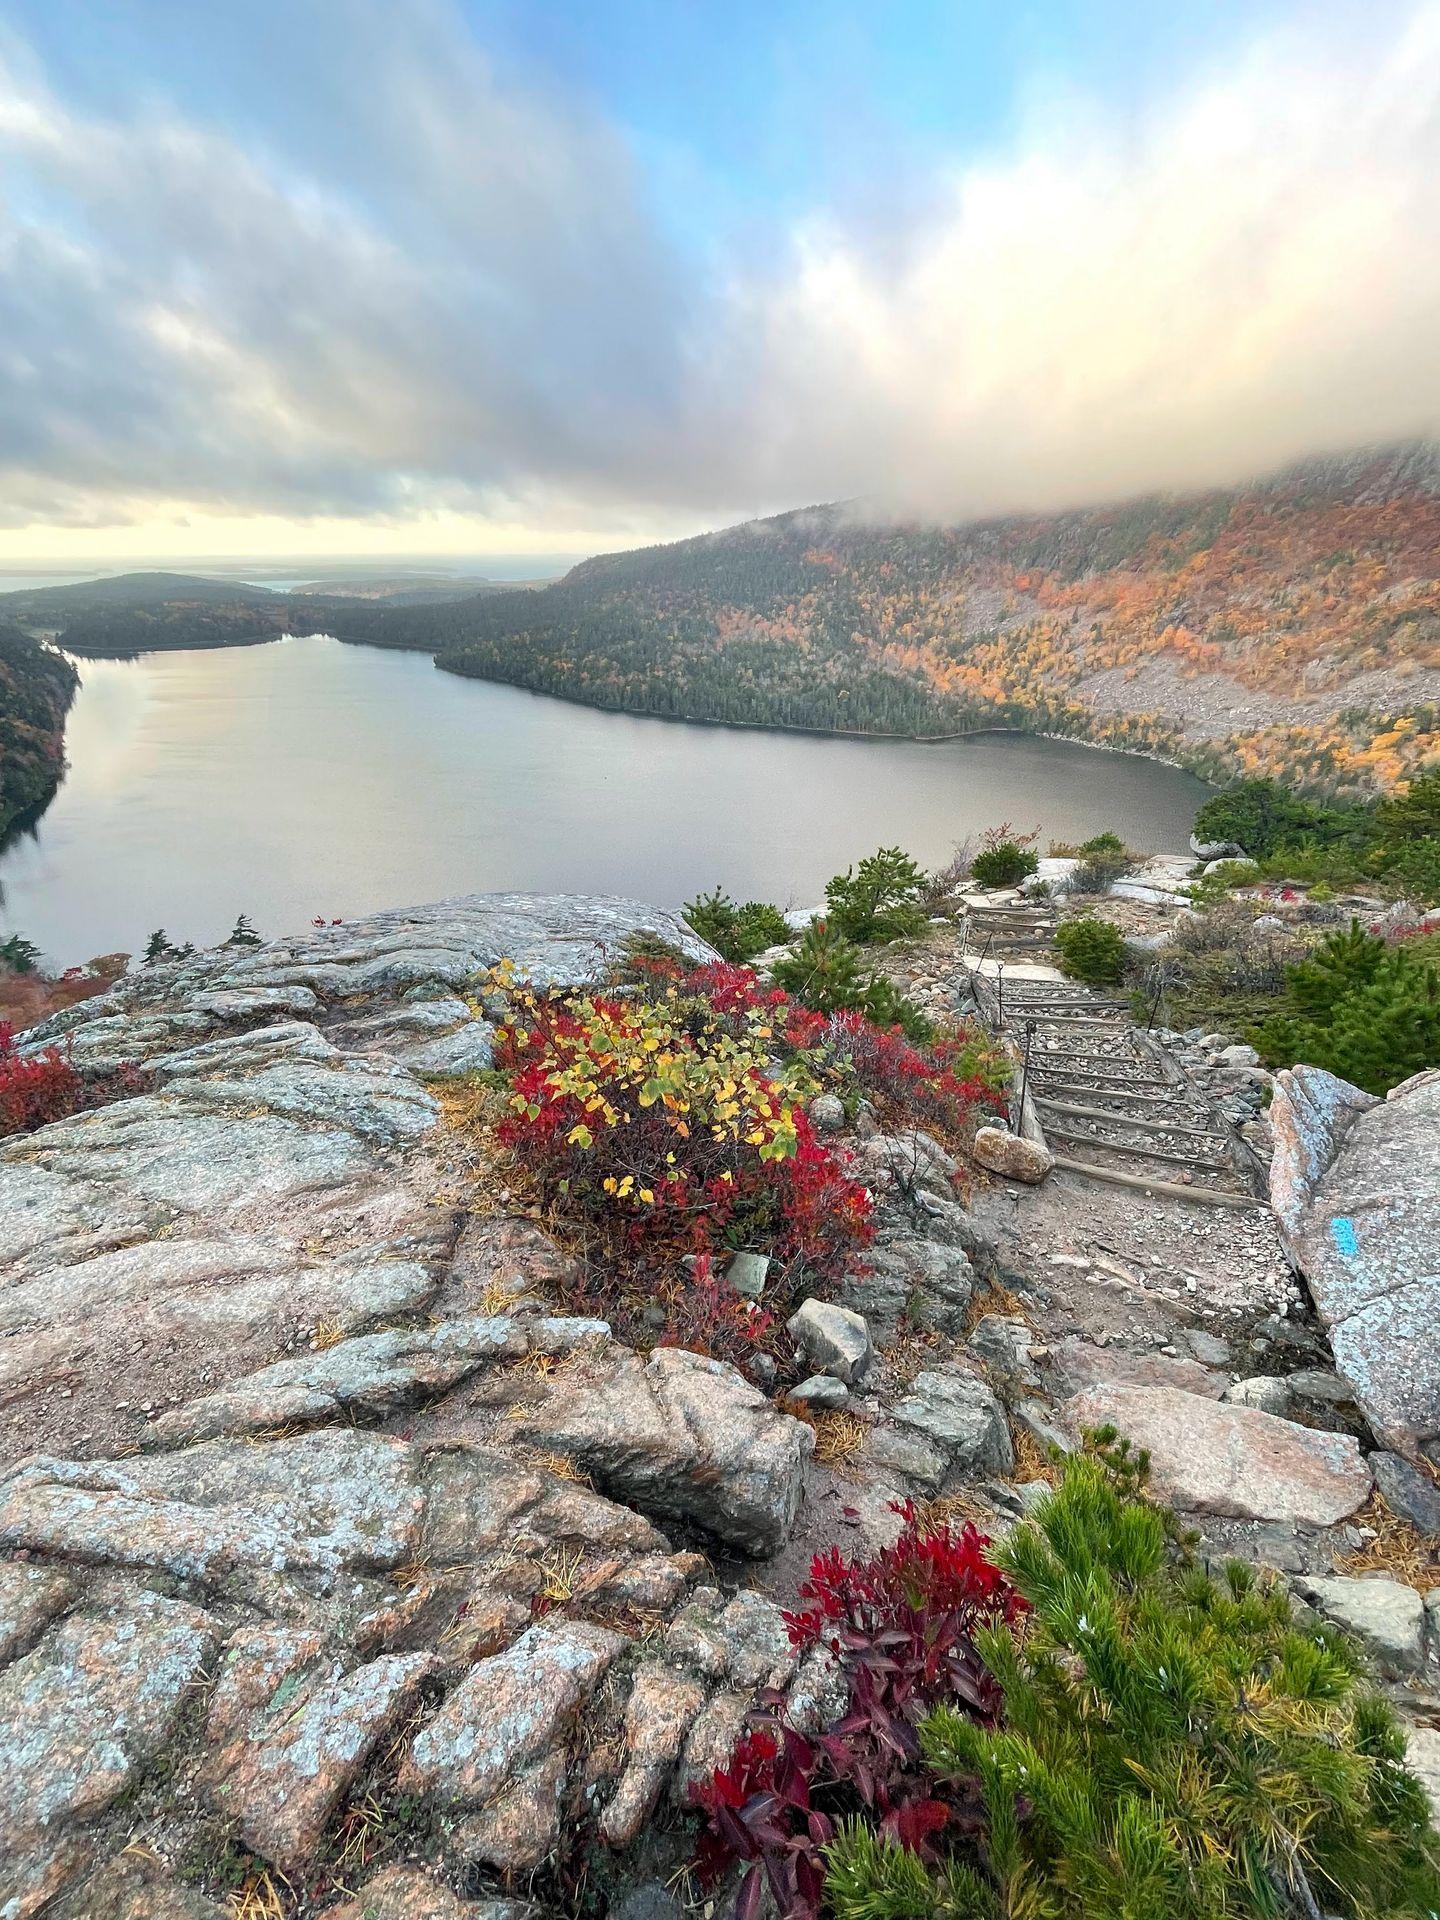 Looking down at Jordan Pond, which is surrounded by fall foliage.